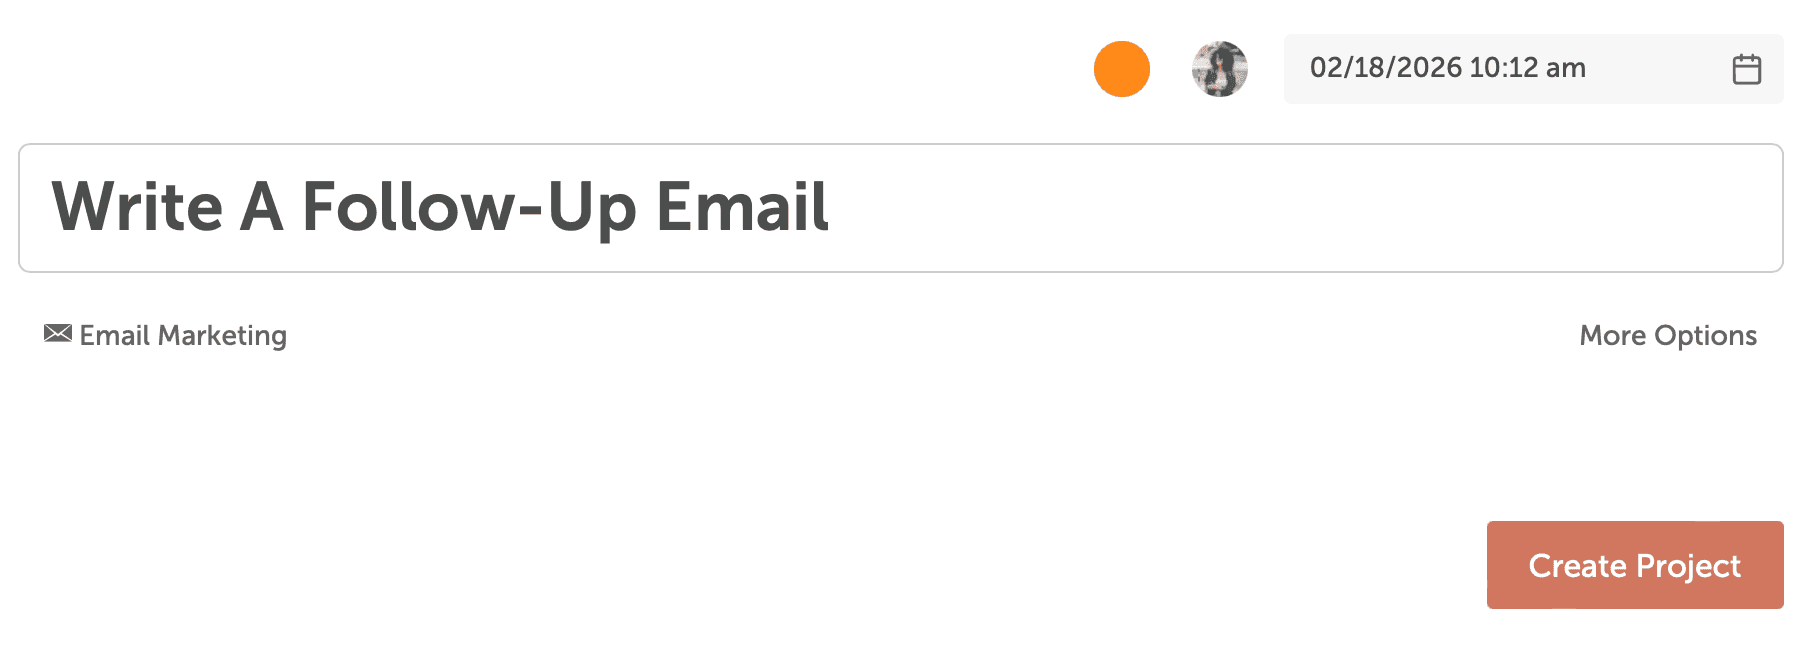 Write a follow up email as the title.